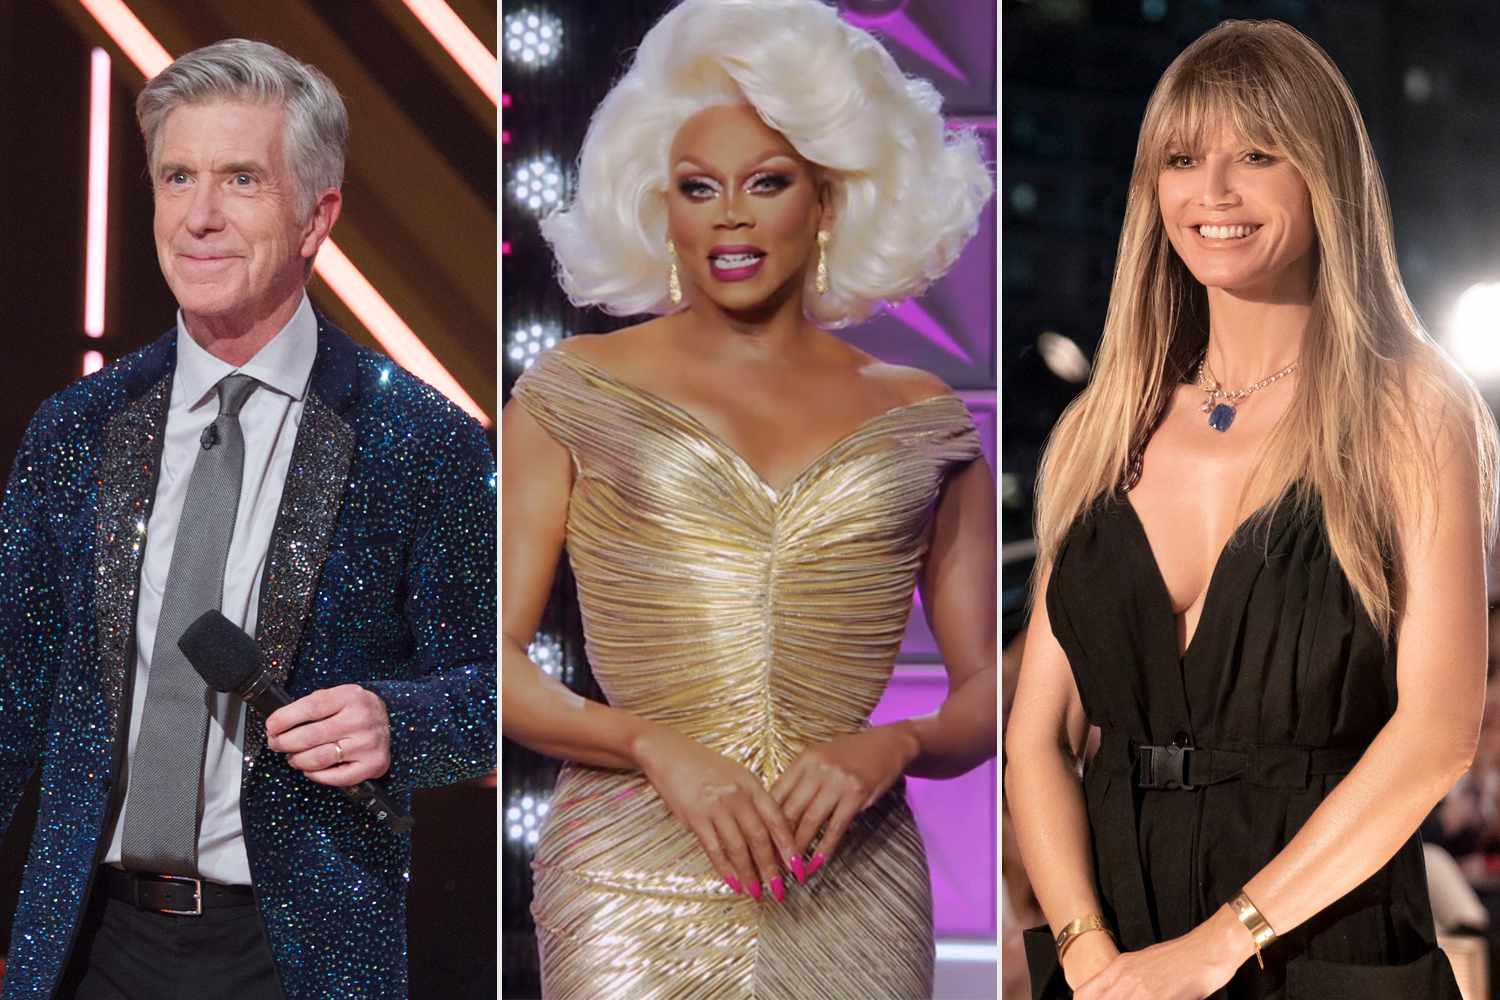 RuPaul sashays to new Emmys record, joins Heidi Klum, Tom Bergeron as most-nominated hosts in history